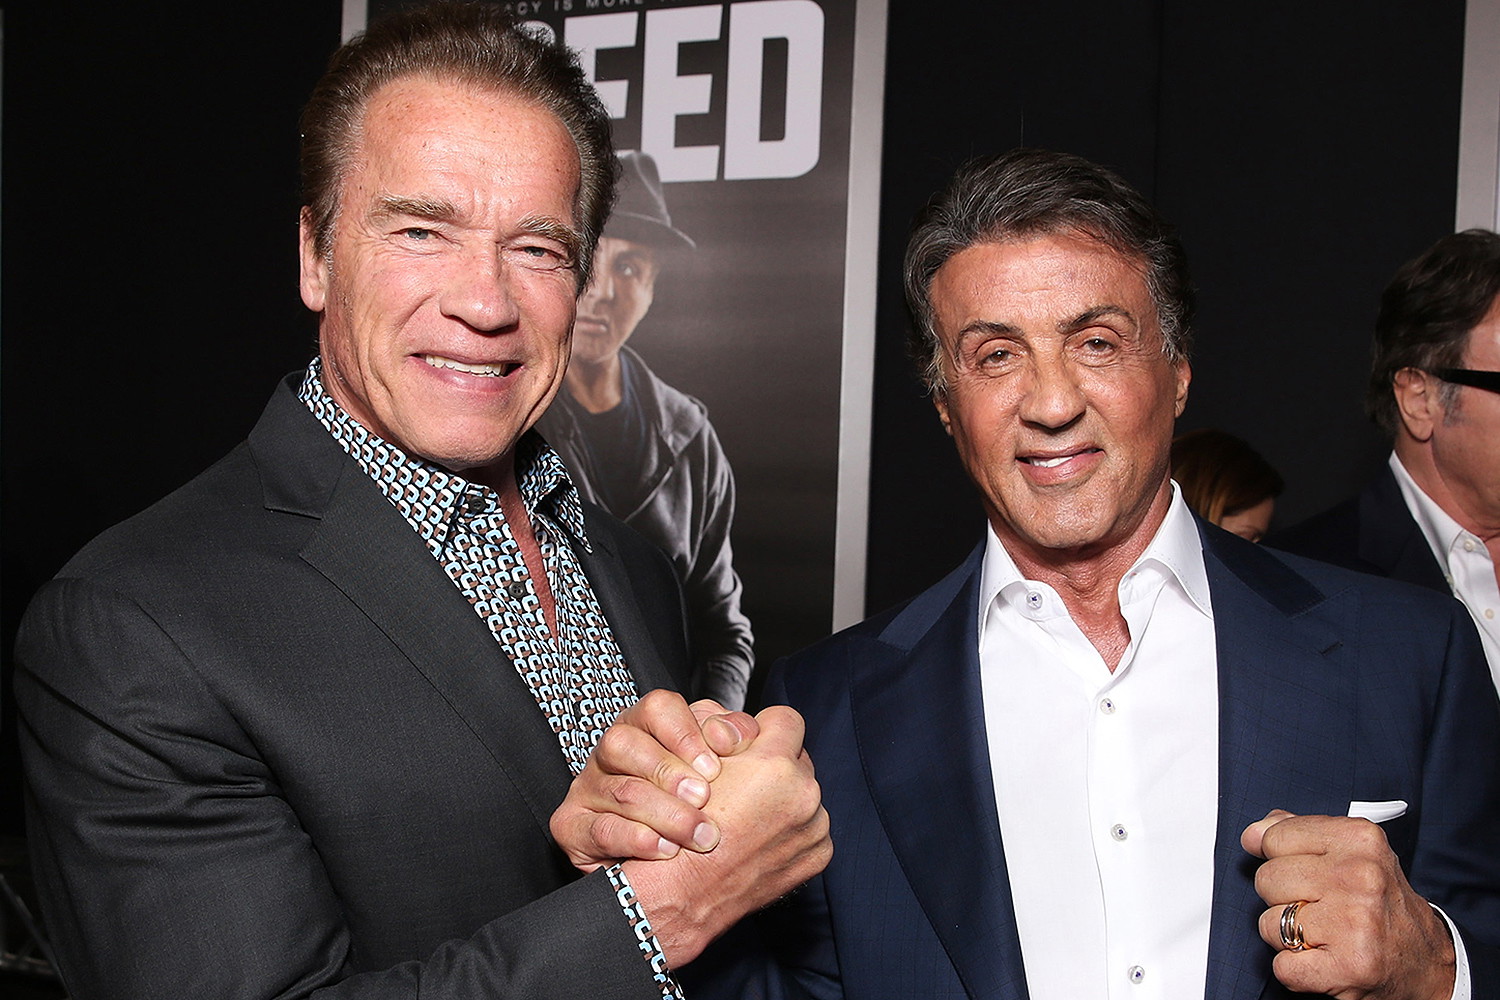 The infamous Arnold Schwarzenegger and Sylvester Stallone rivalry